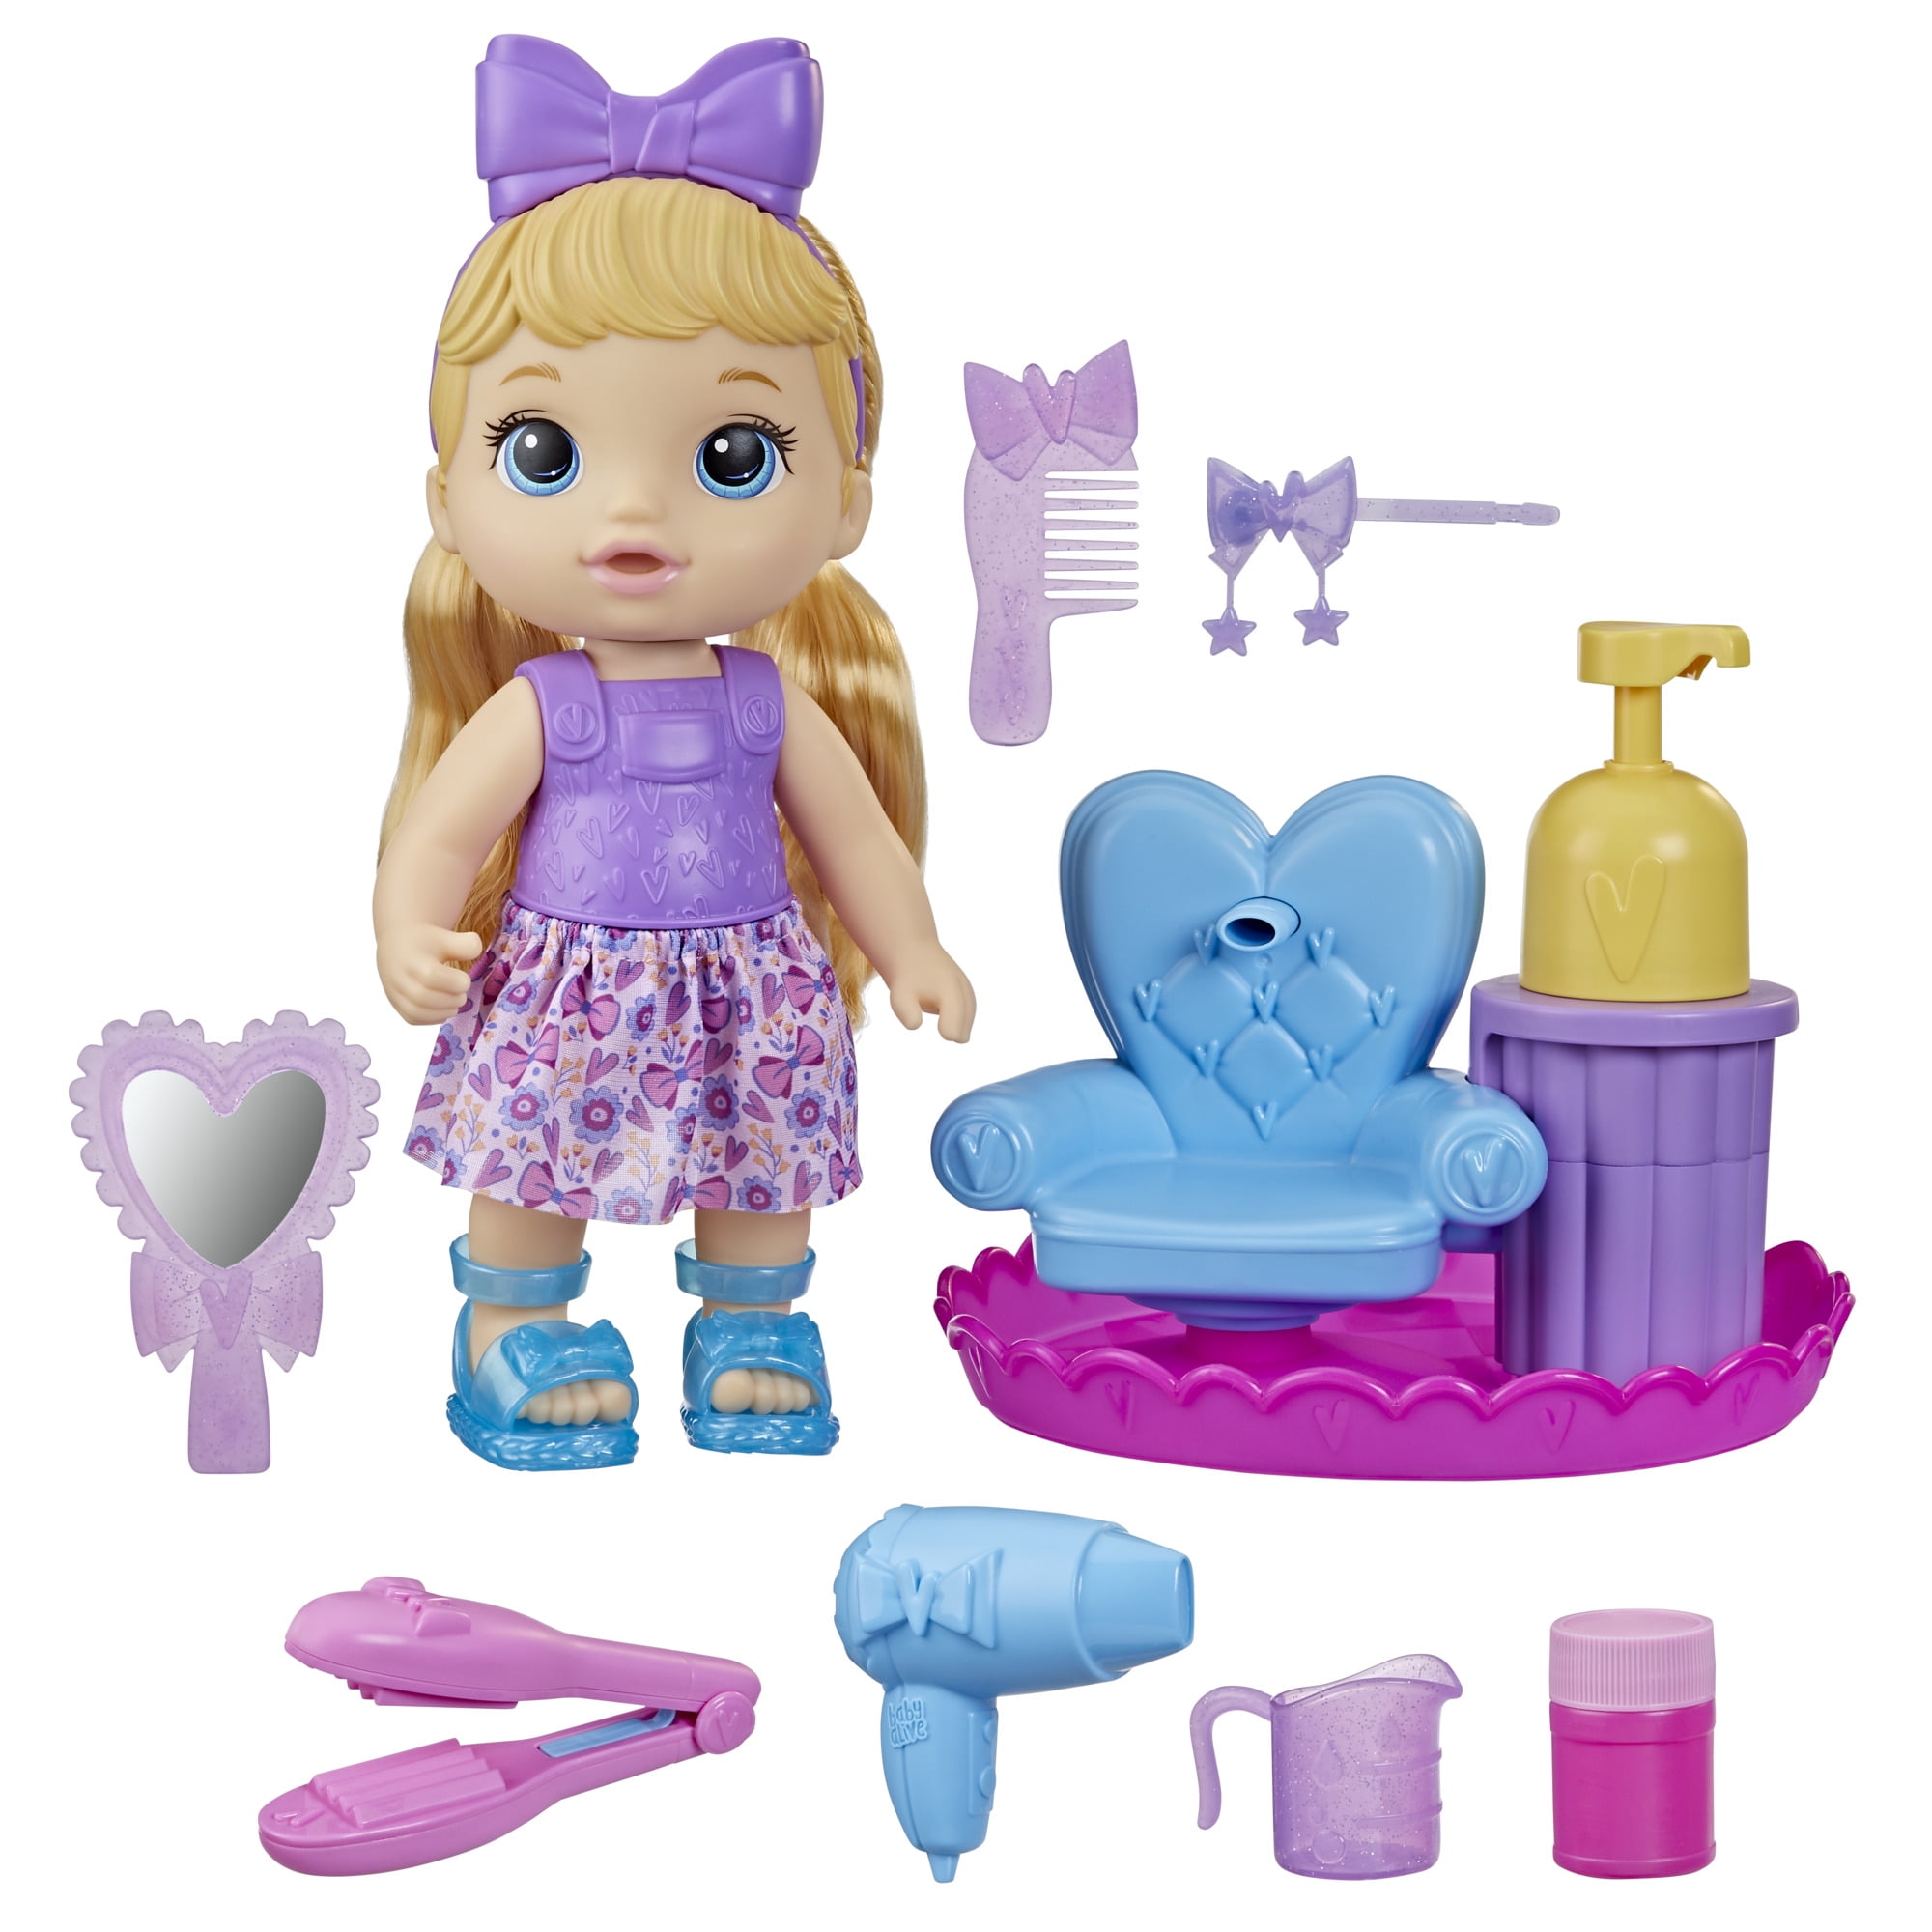 Baby Alive Sudsy Styling Doll, Blonde Hair, Includes 12-inch Baby Doll ...